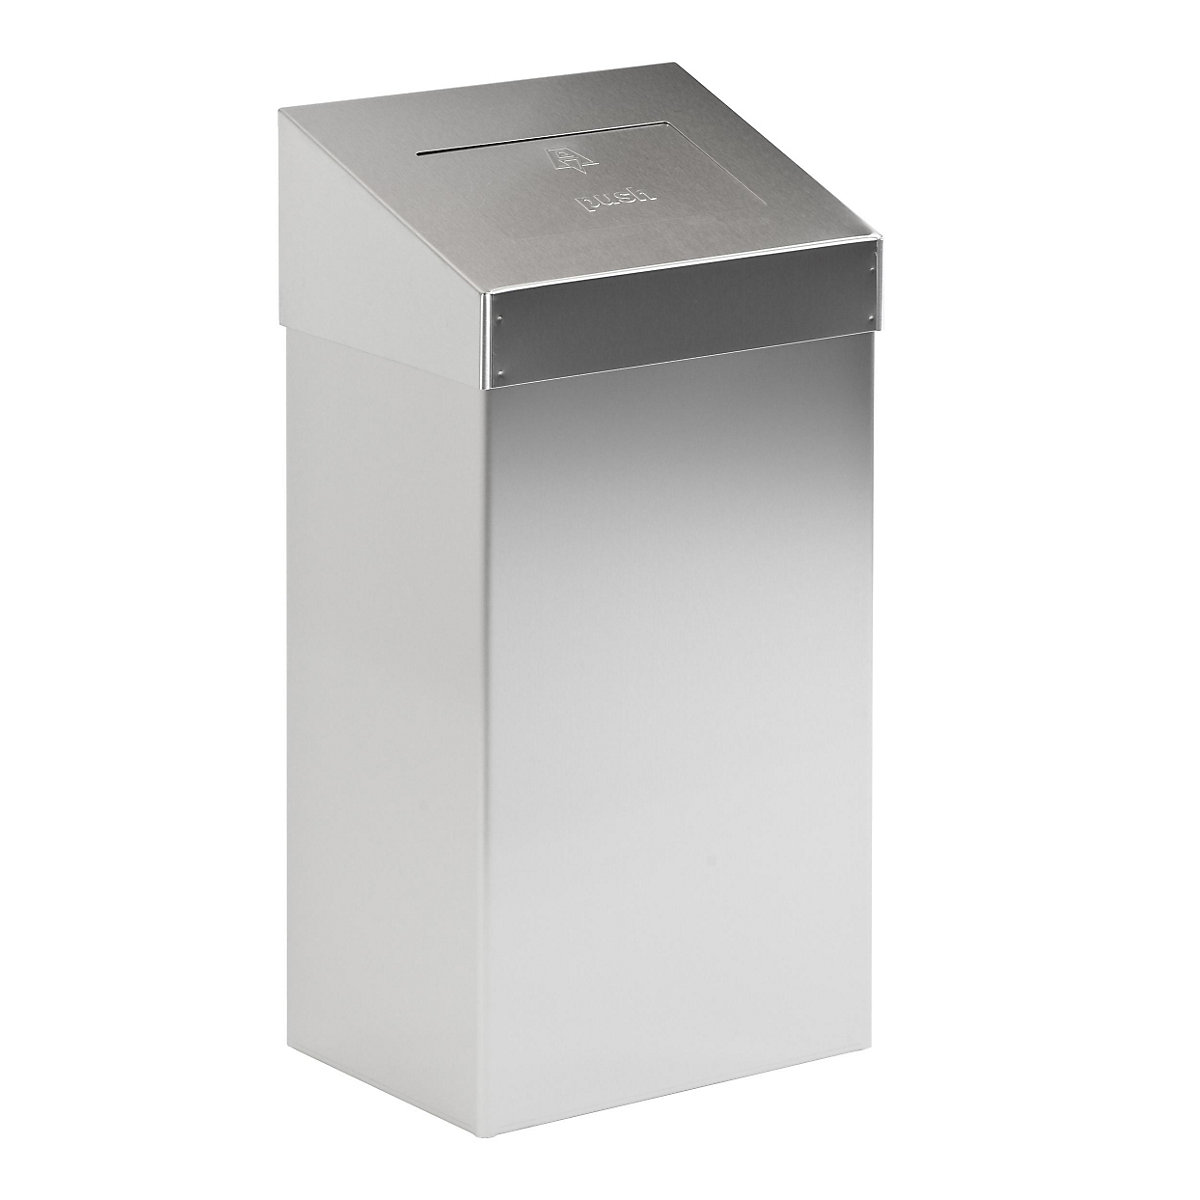 Waste collector with push lid, capacity 50 l, WxHxD 380 x 680 x 250 mm, stainless steel, matt finish-1